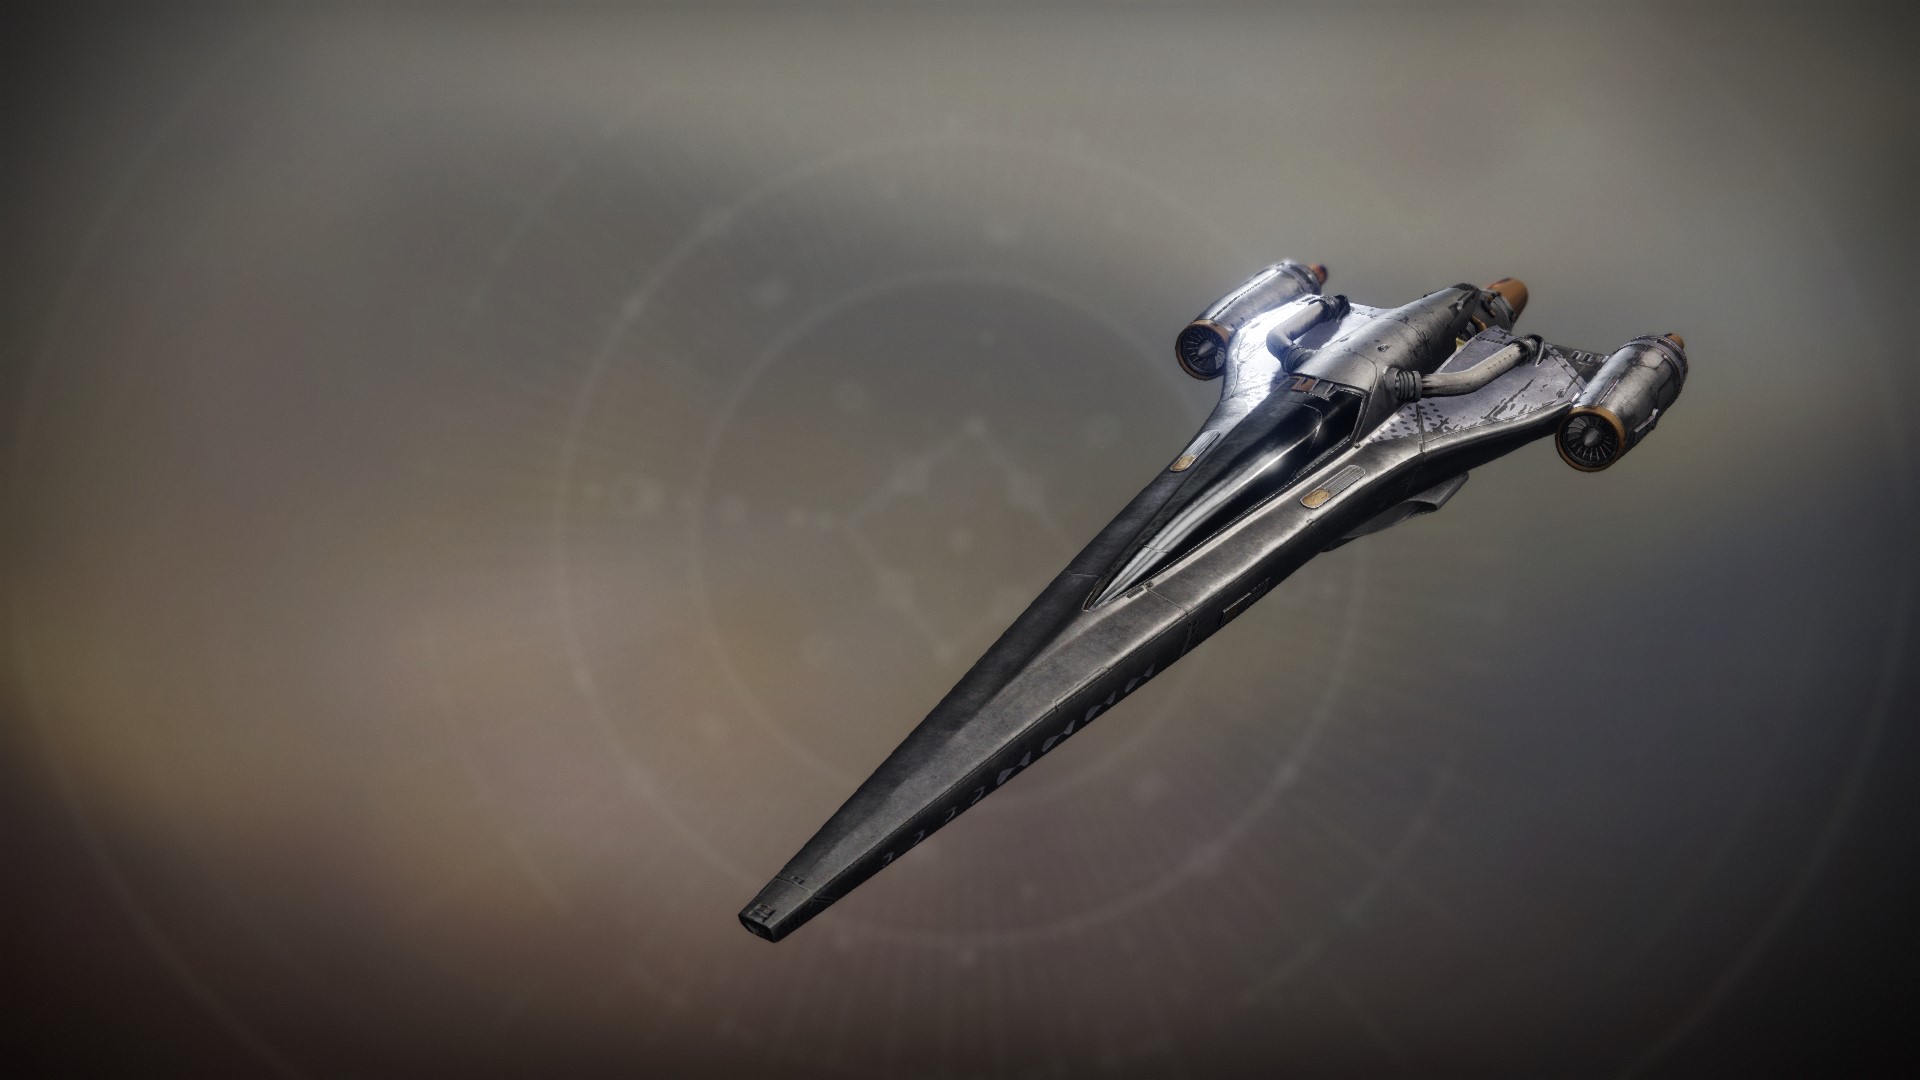 An in-game render of the Black Peregrine.